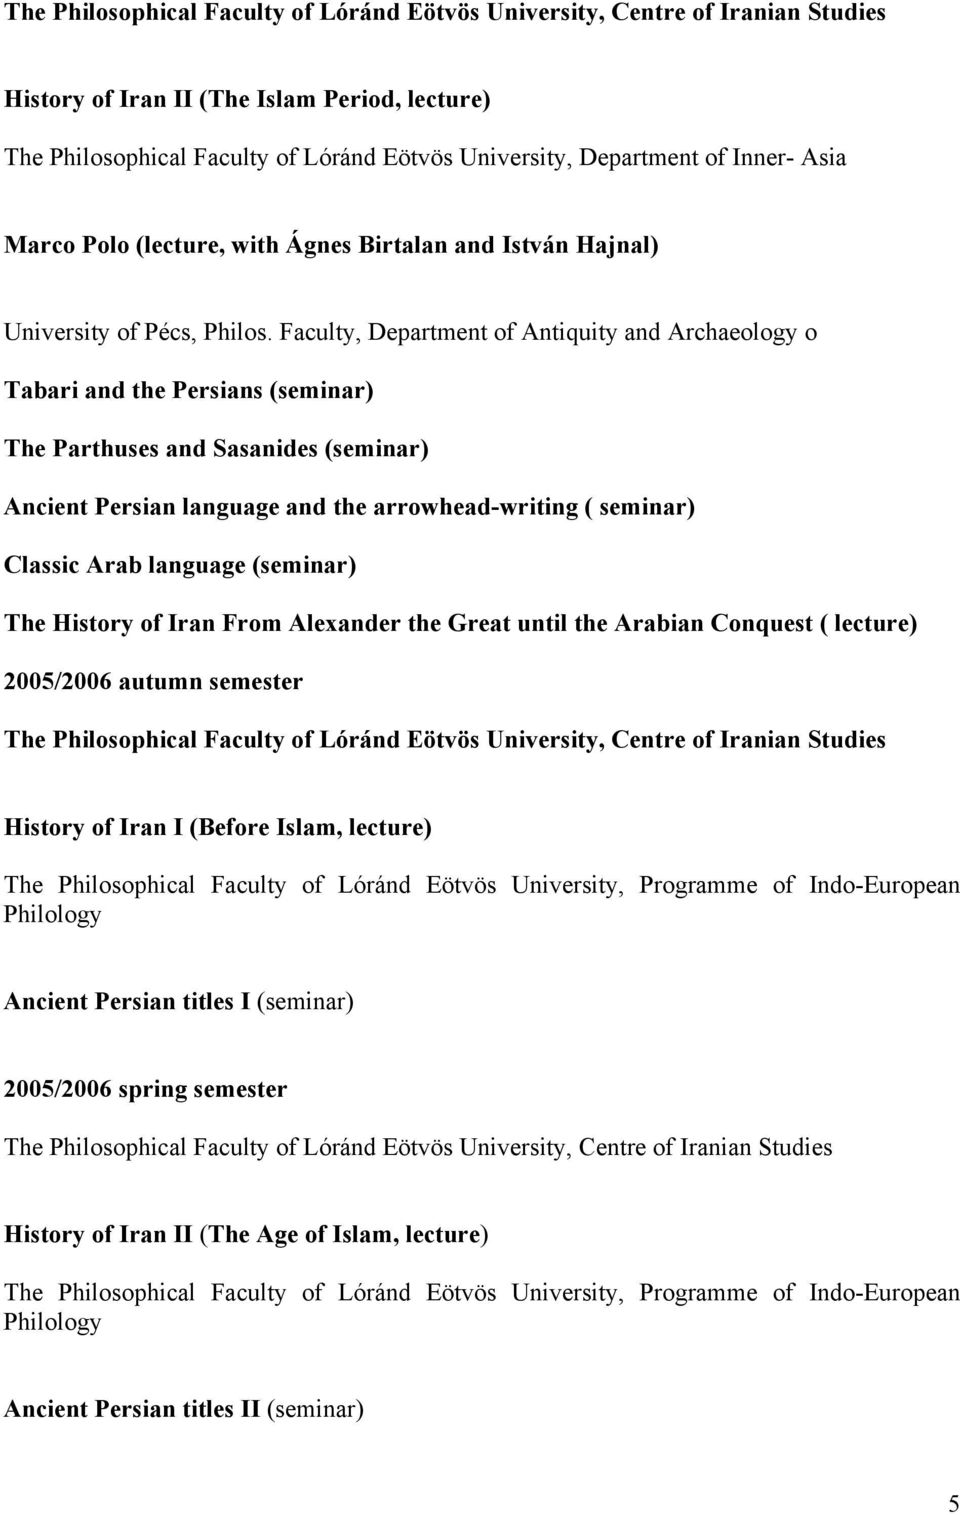 Faculty, Department of Antiquity and Archaeology o Tabari and the Persians (seminar) The Parthuses and Sasanides (seminar) Ancient Persian language and the arrowhead-writing ( seminar) Classic Arab